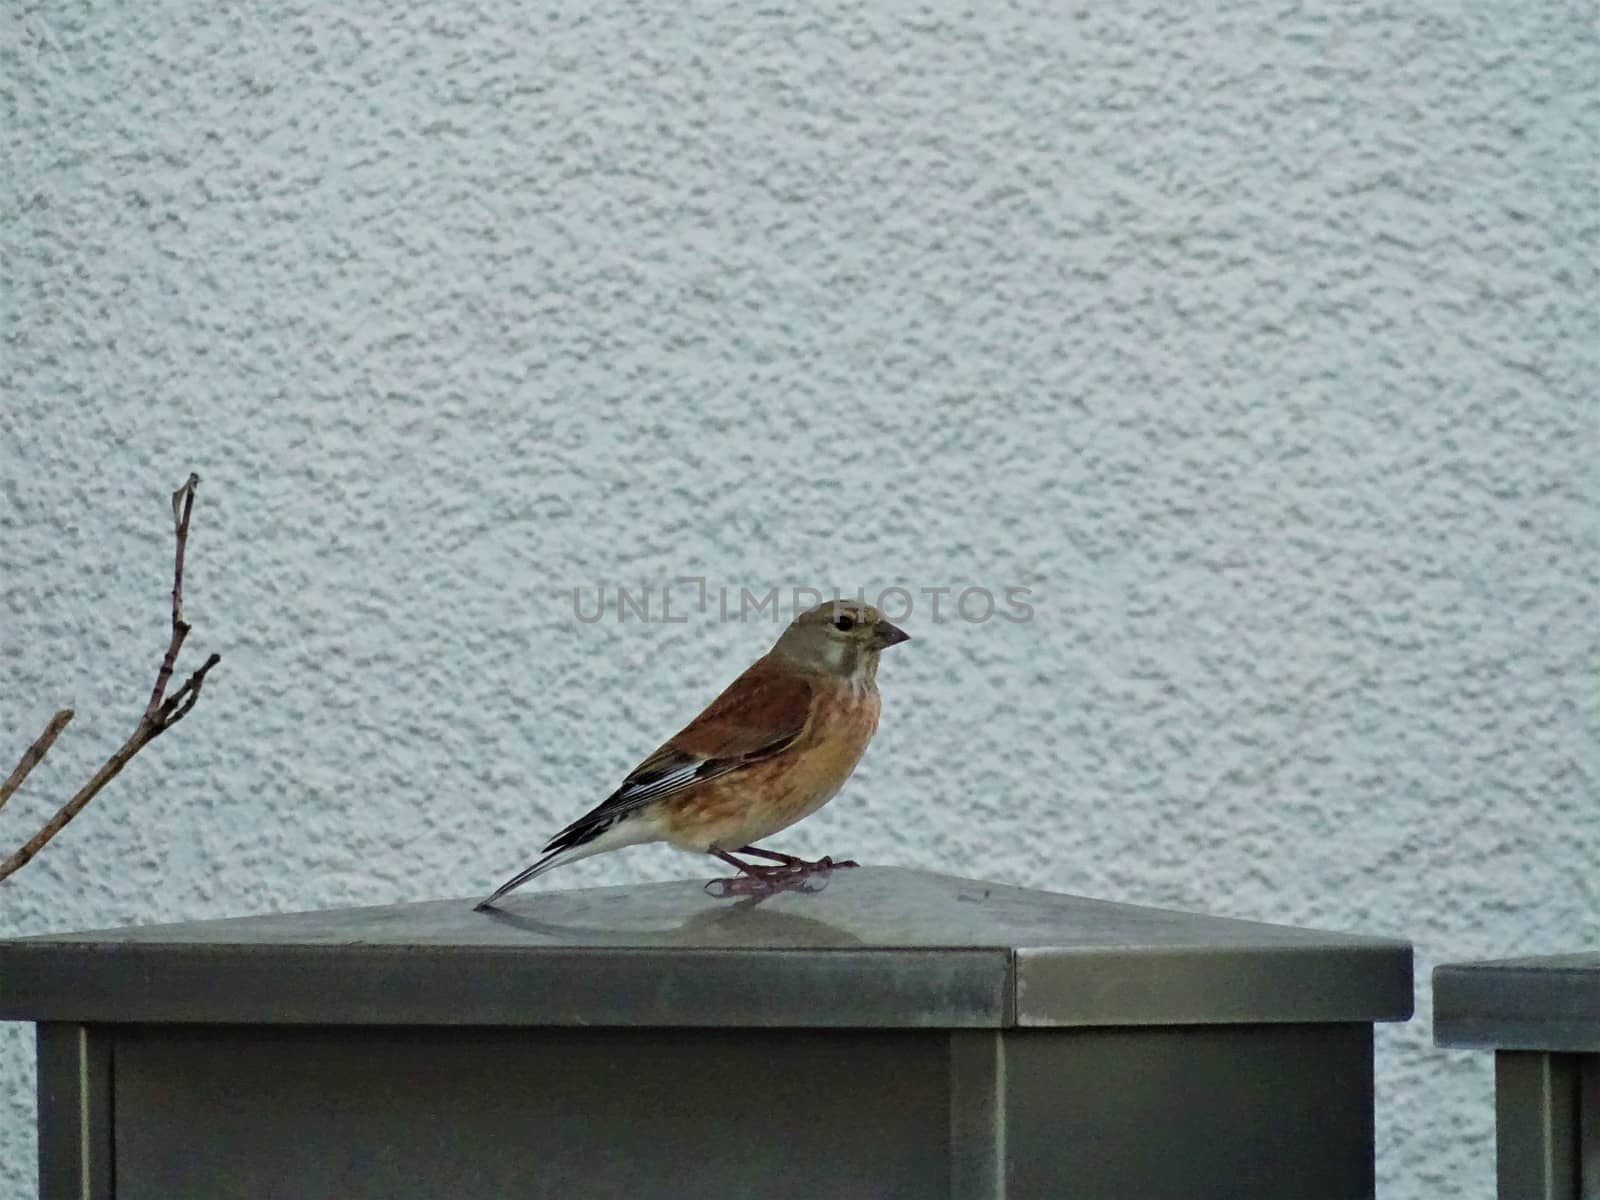 Cute sparrow sitting on a mail box in Germany